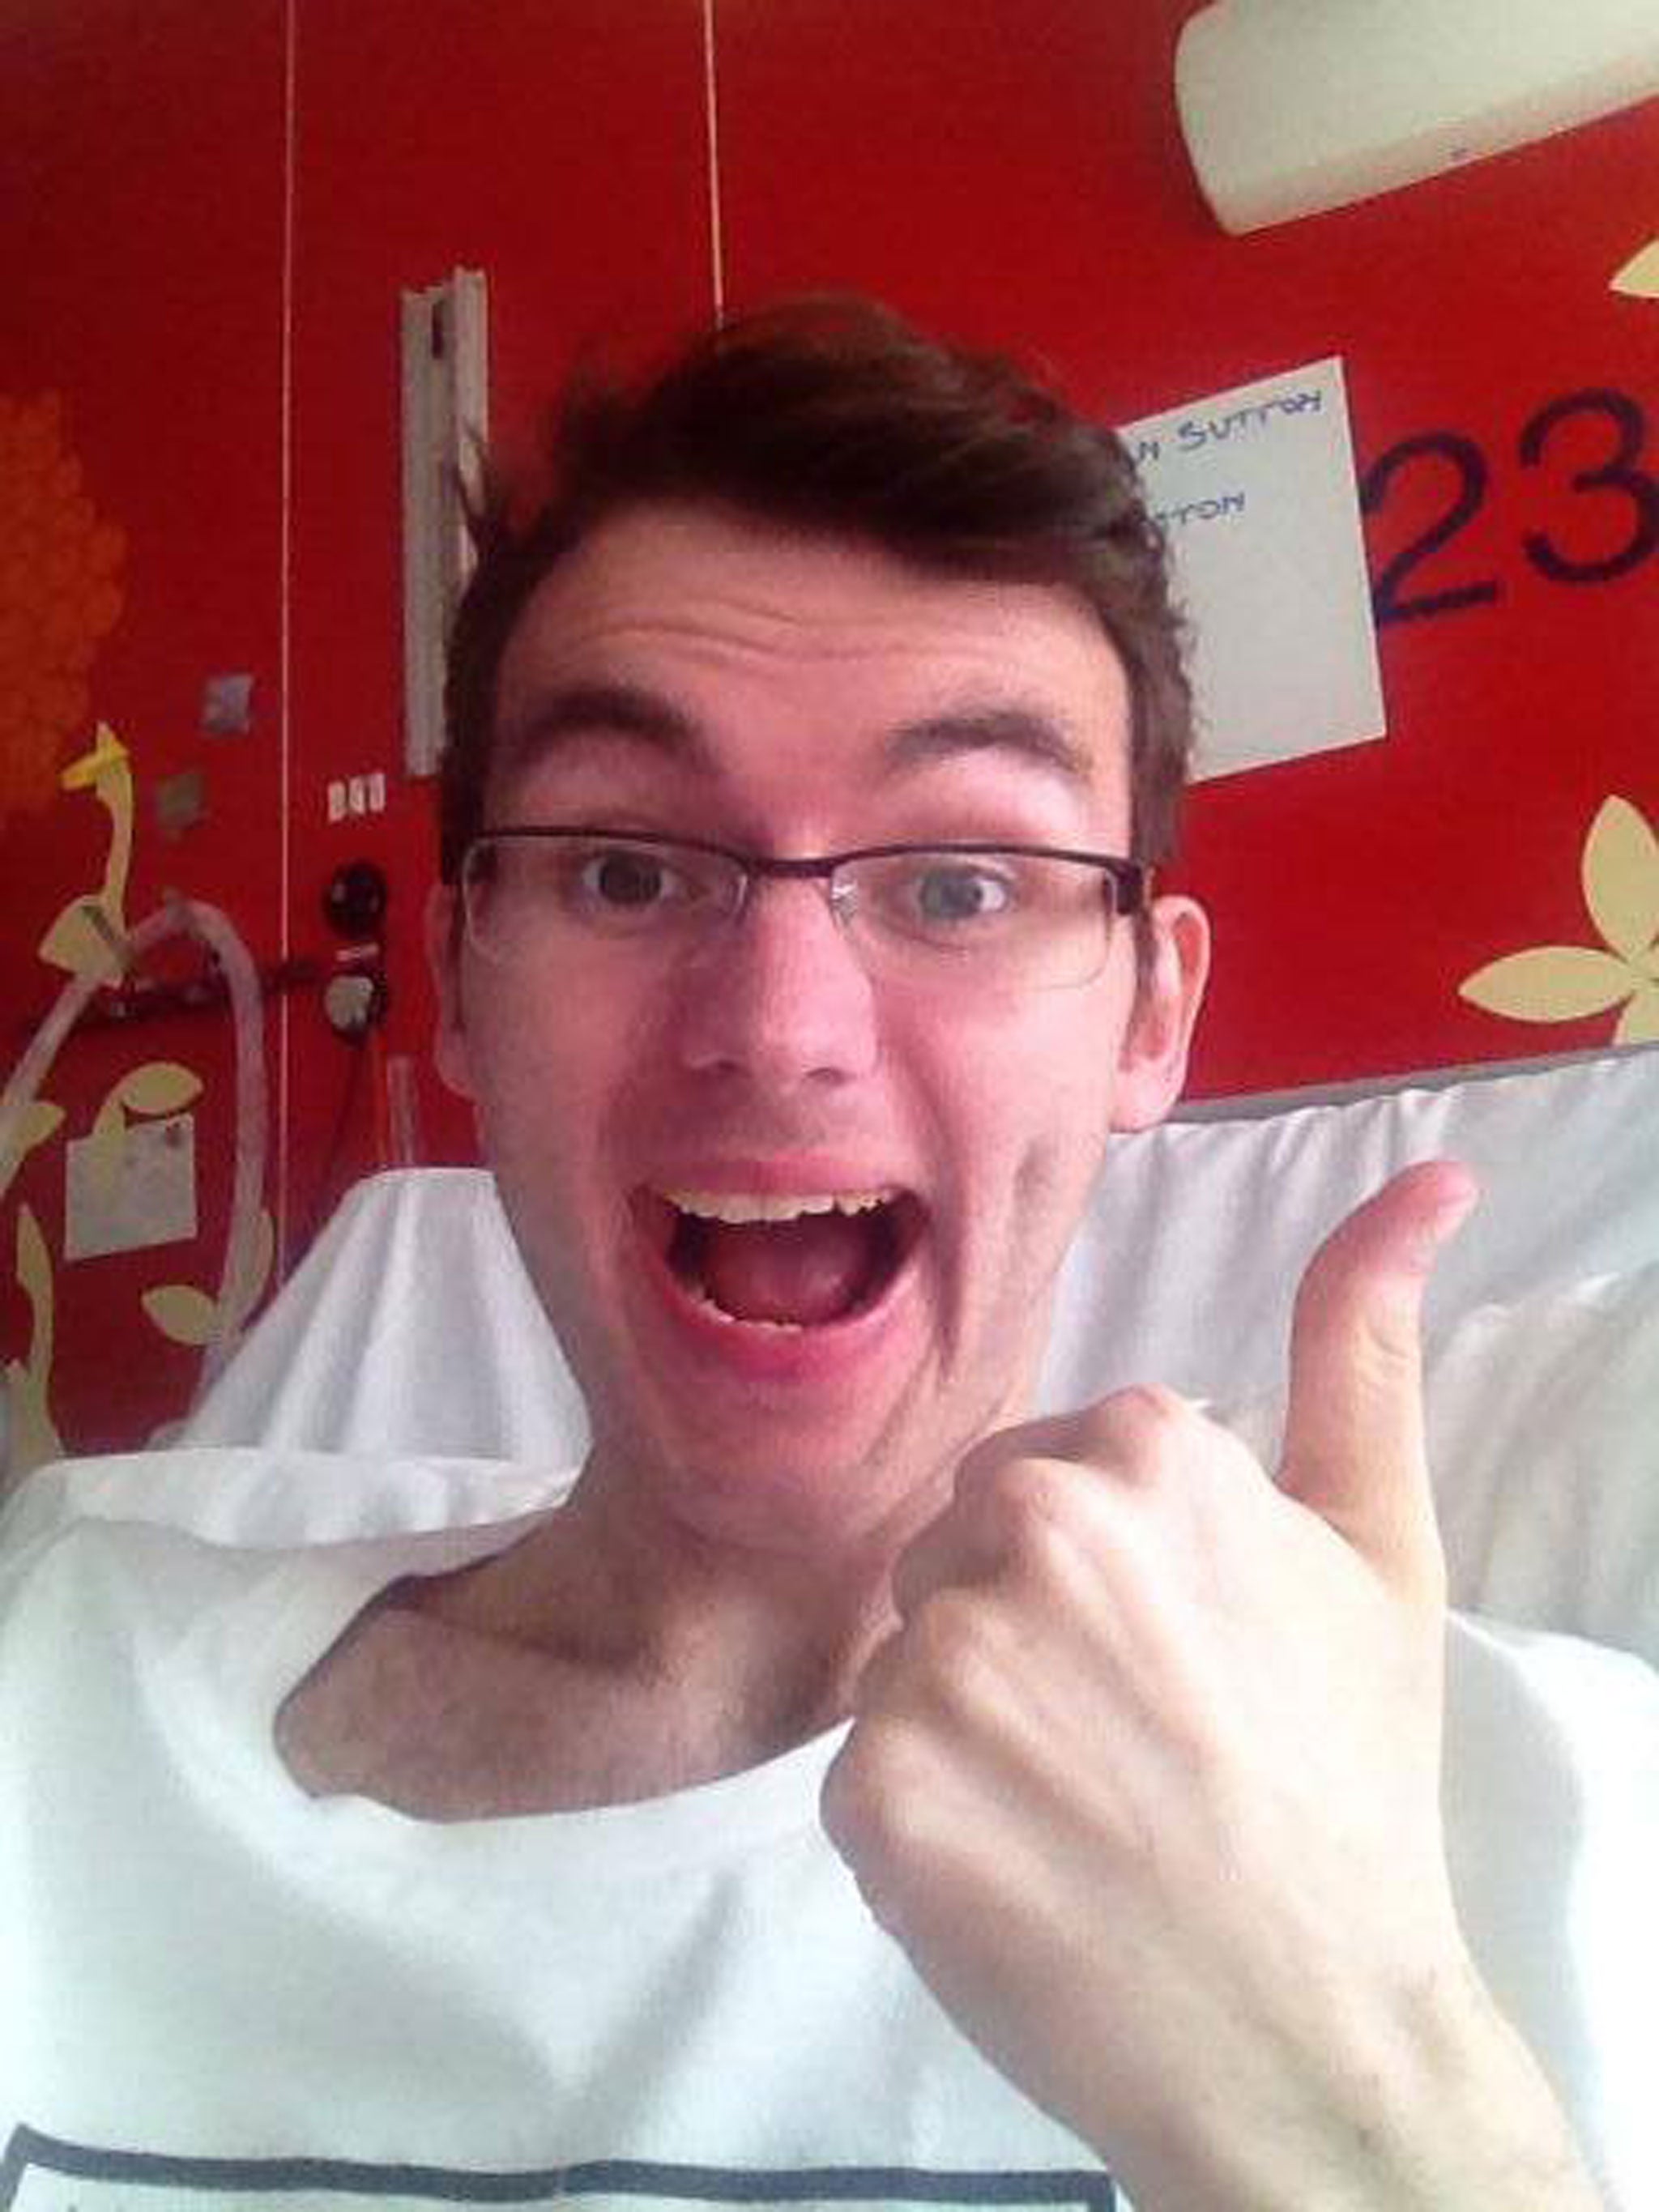 Stephen Sutton, who has raised over £3 million for charity